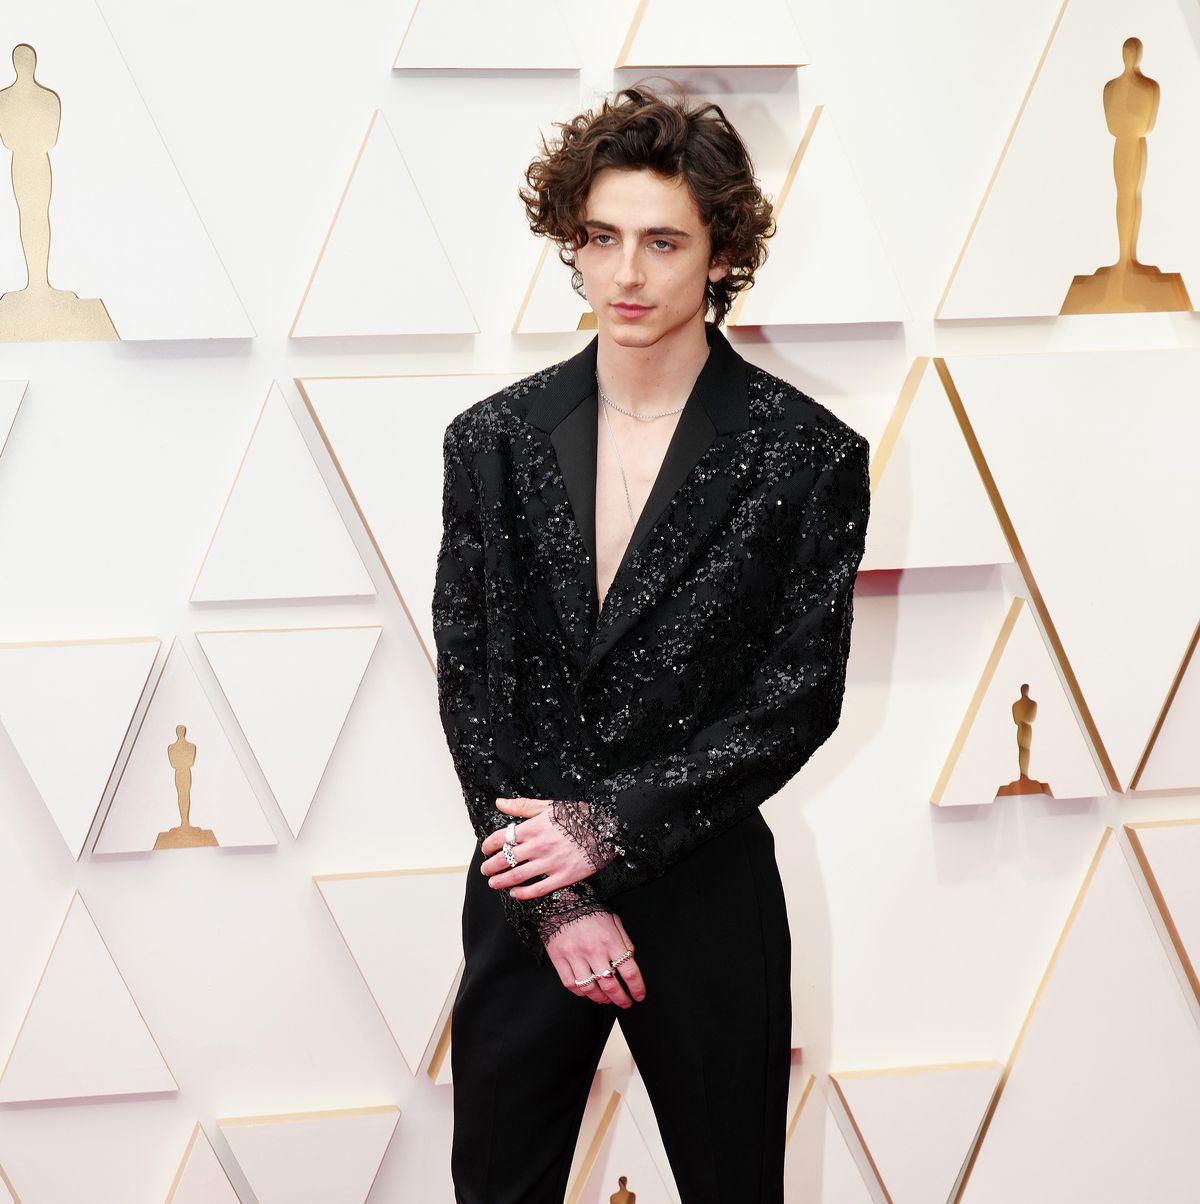 Here Is Timothée Chalamet in a Very Good Red Louis Vuitton Suit